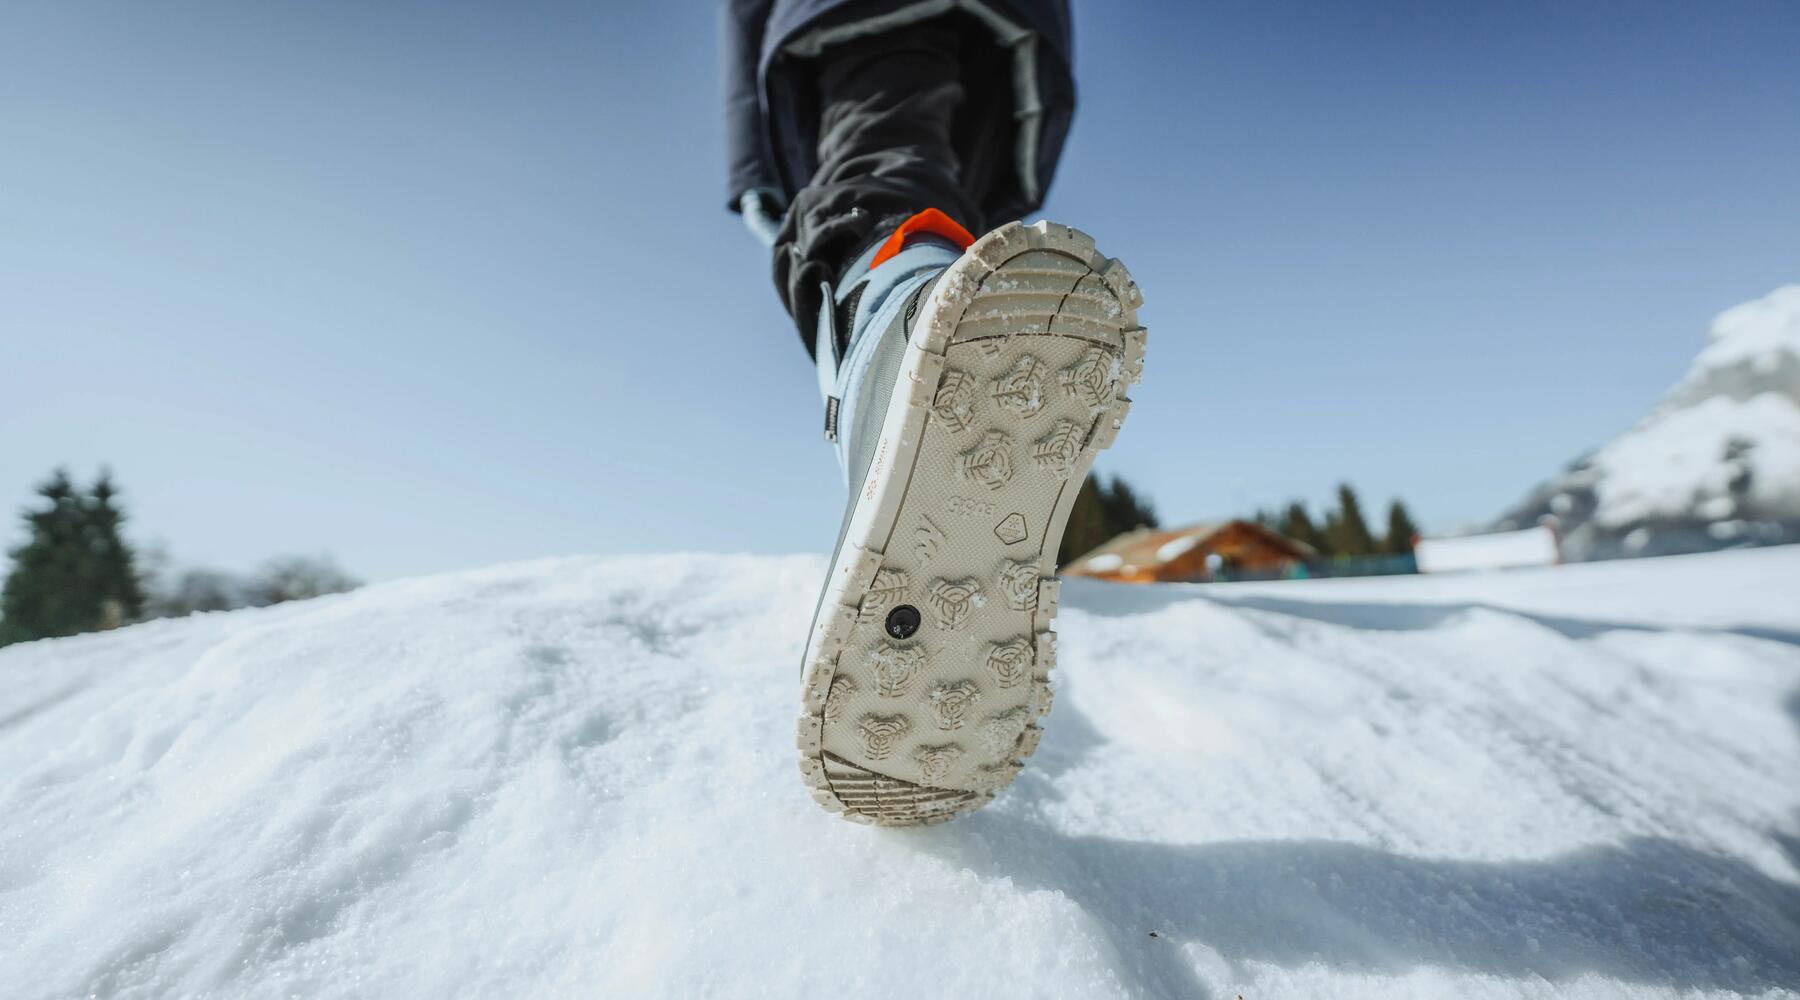 How to choose your boots for winter hikes